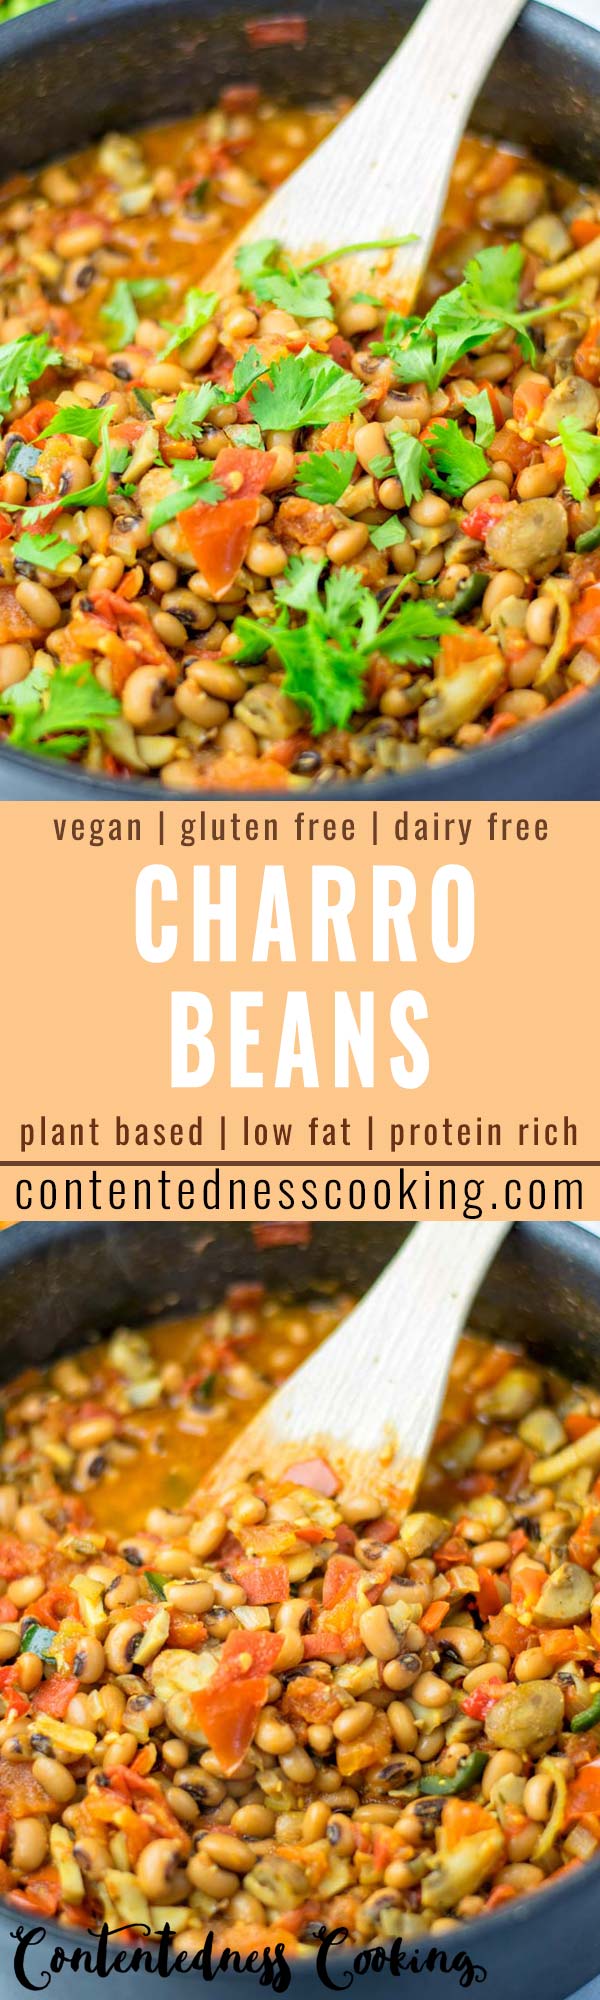 These Charro Beans are easy to make in one pot and ready in 20 minutes. Protein rich, made with delicious authentic spices, a keeper that the whole family will love. Ideal for meal prep, make ahead meals, dinner, lunch and much more.